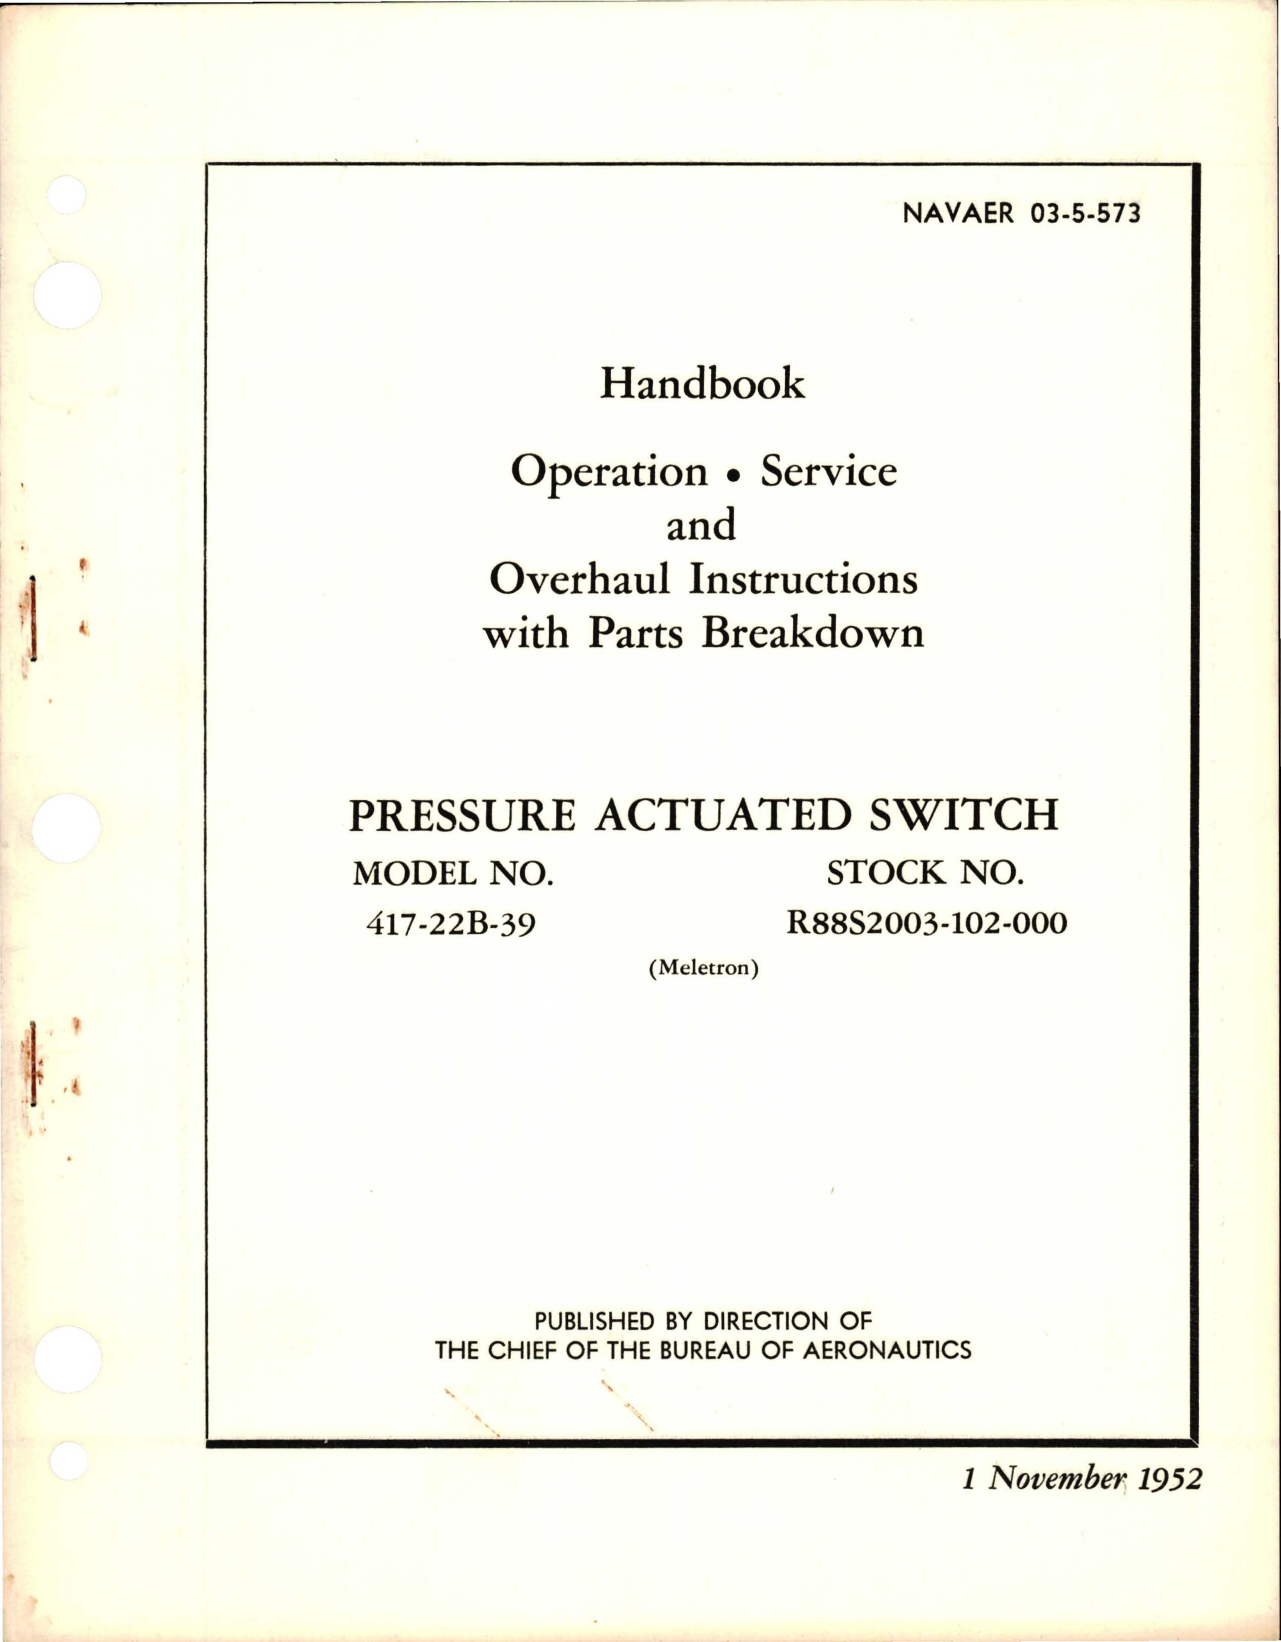 Sample page 1 from AirCorps Library document: Operation, Service and Overhaul Instructions with Parts Breakdown for Pressure Actuated Switch - Model 417-22B-39